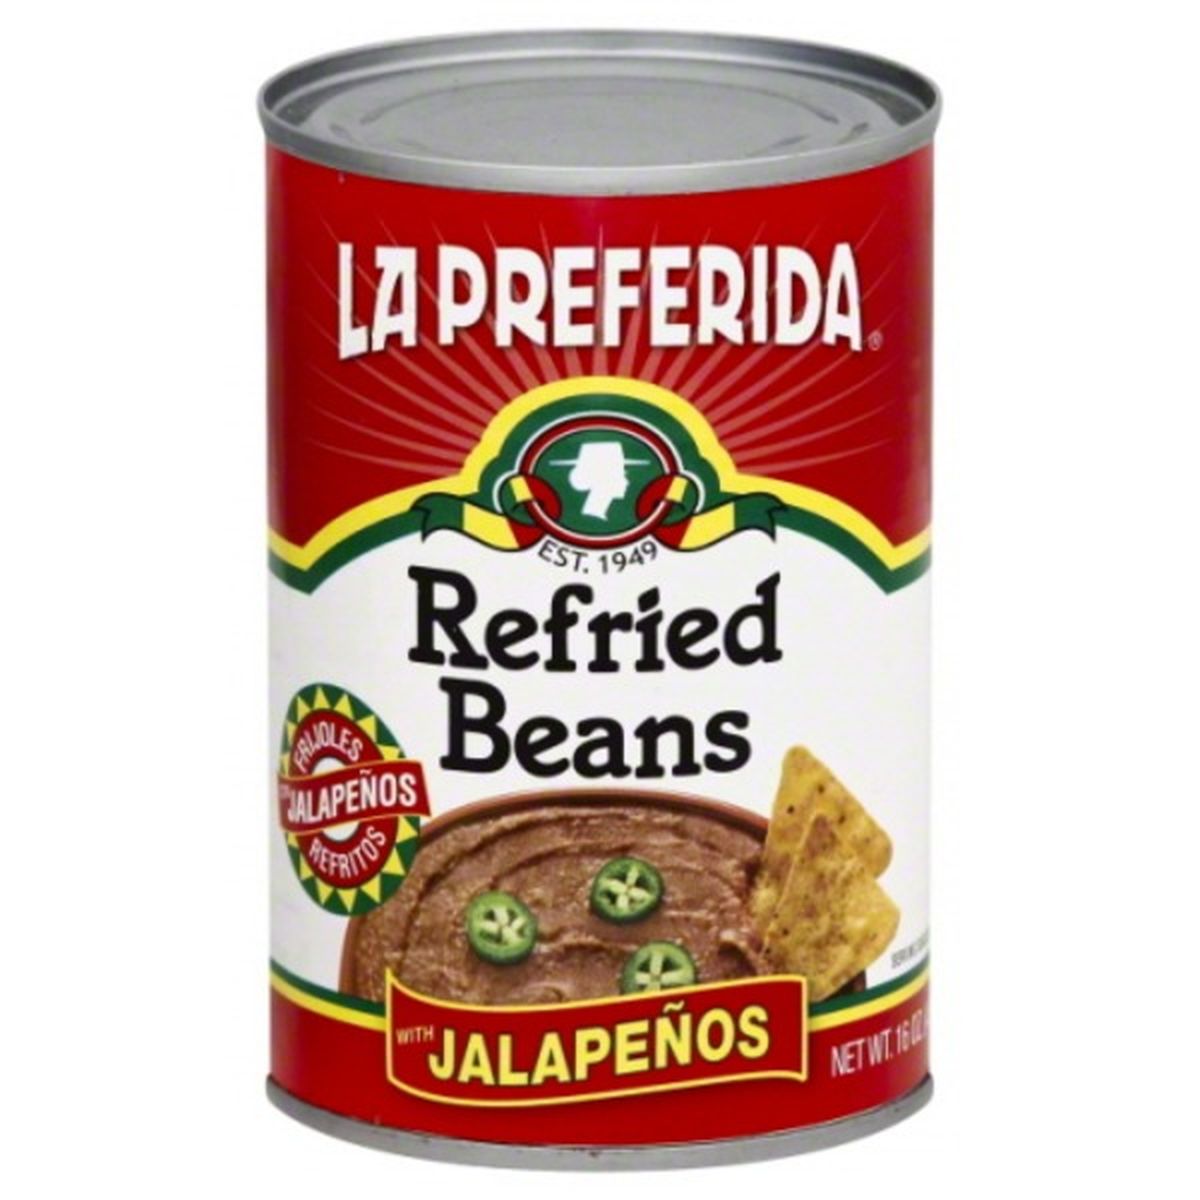 Calories in La Preferida Refried Beans, with Jalapenos